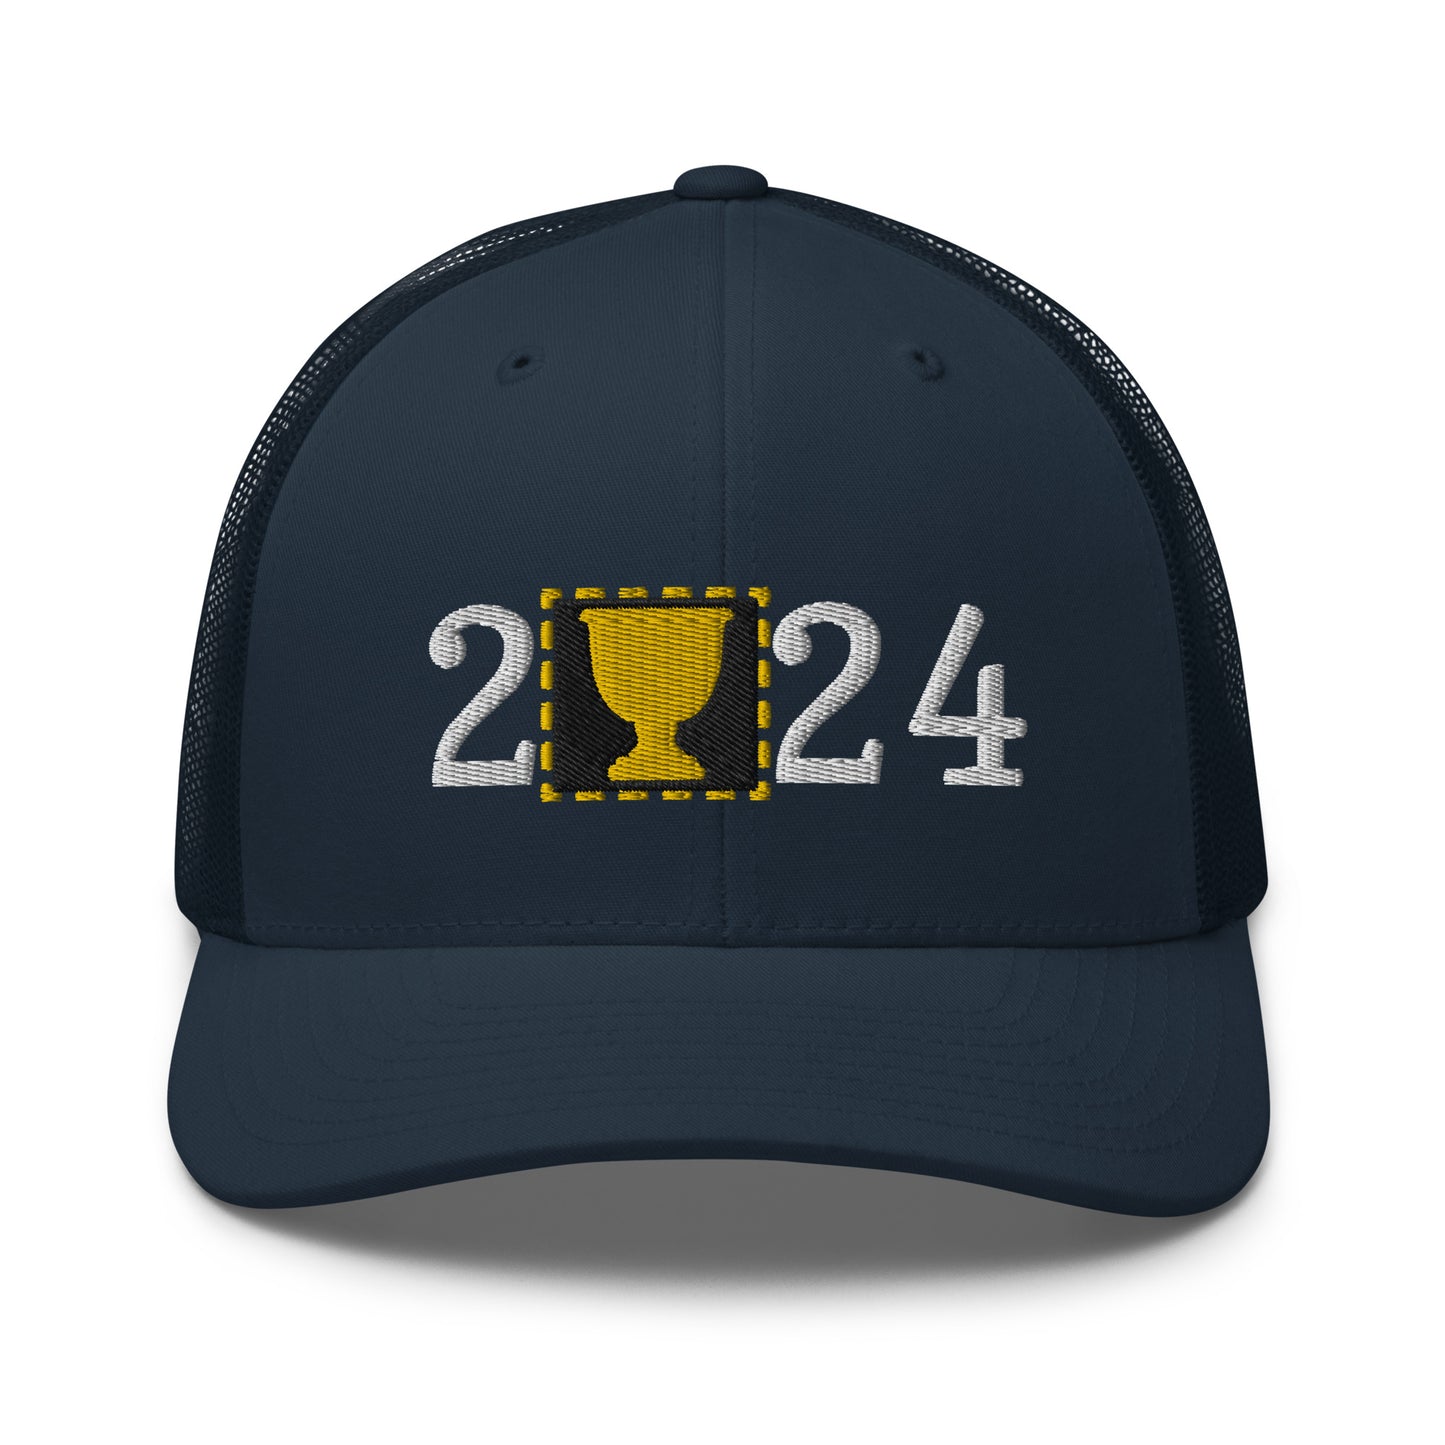 President's Cup Hat / Frank hat / Presidents Cup 2024 / Trucker Cap